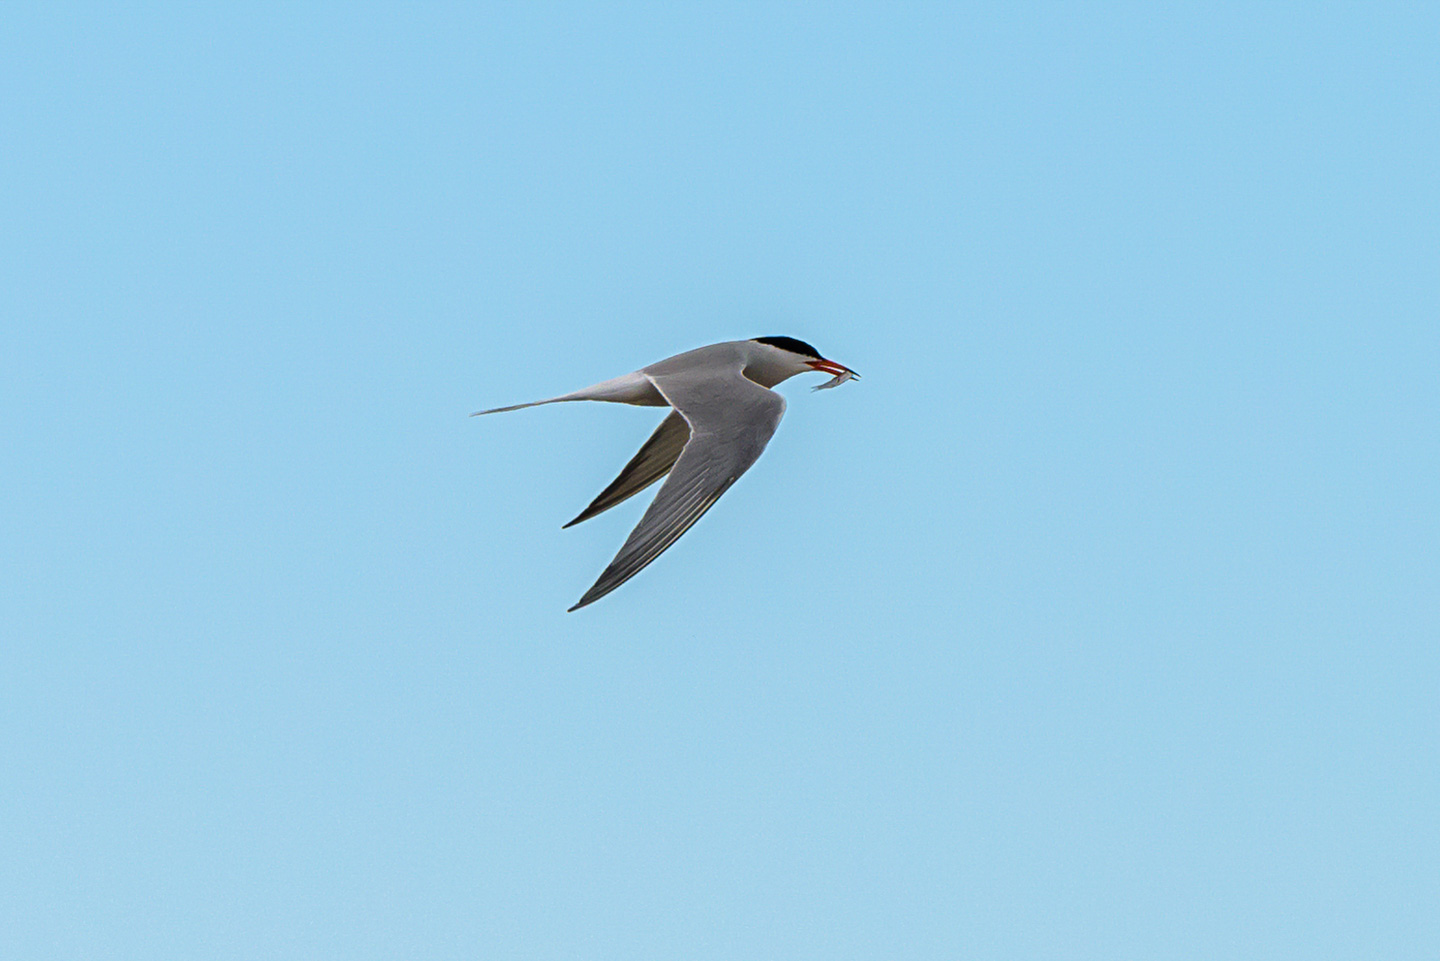 Tern with a meal in its mouth